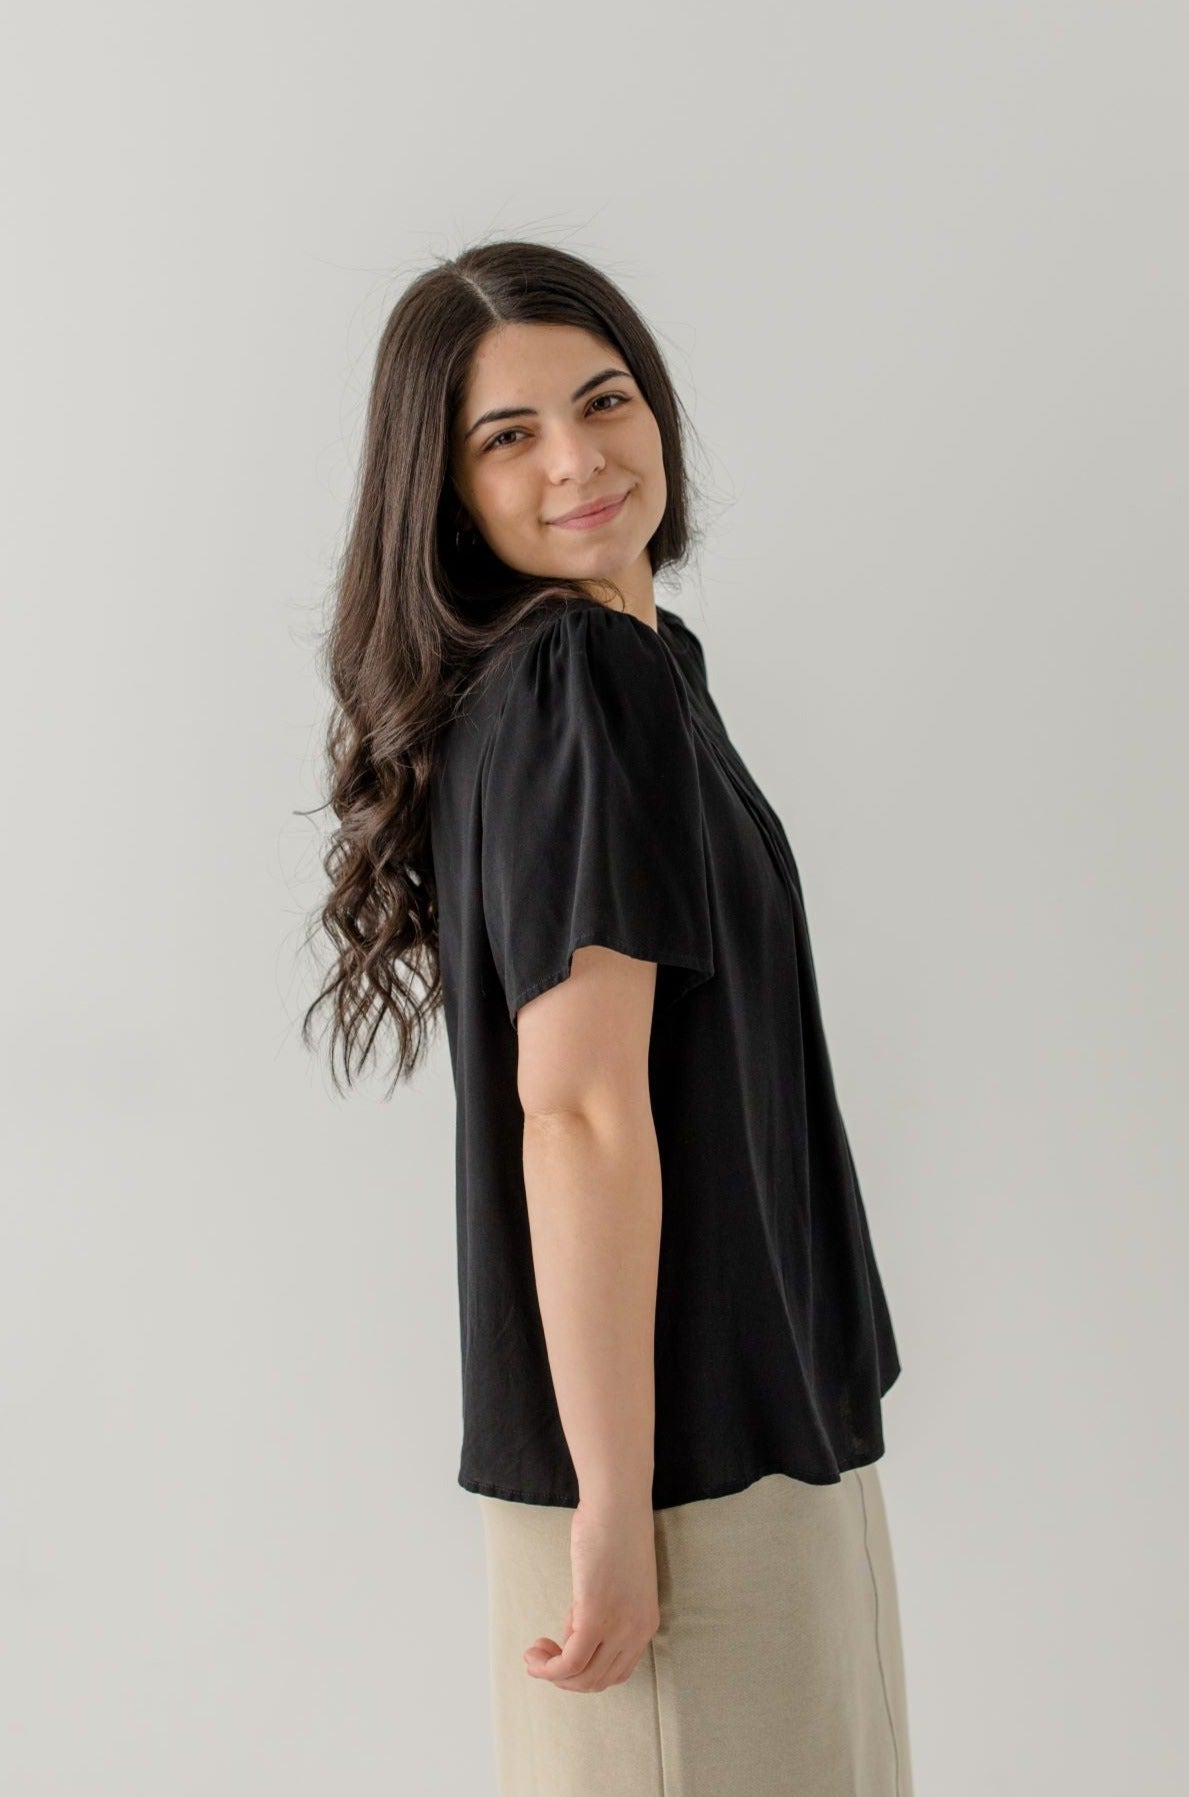 Modest Tops & Blouses | Women's Shirts | The Main Street Exchange – Page 2